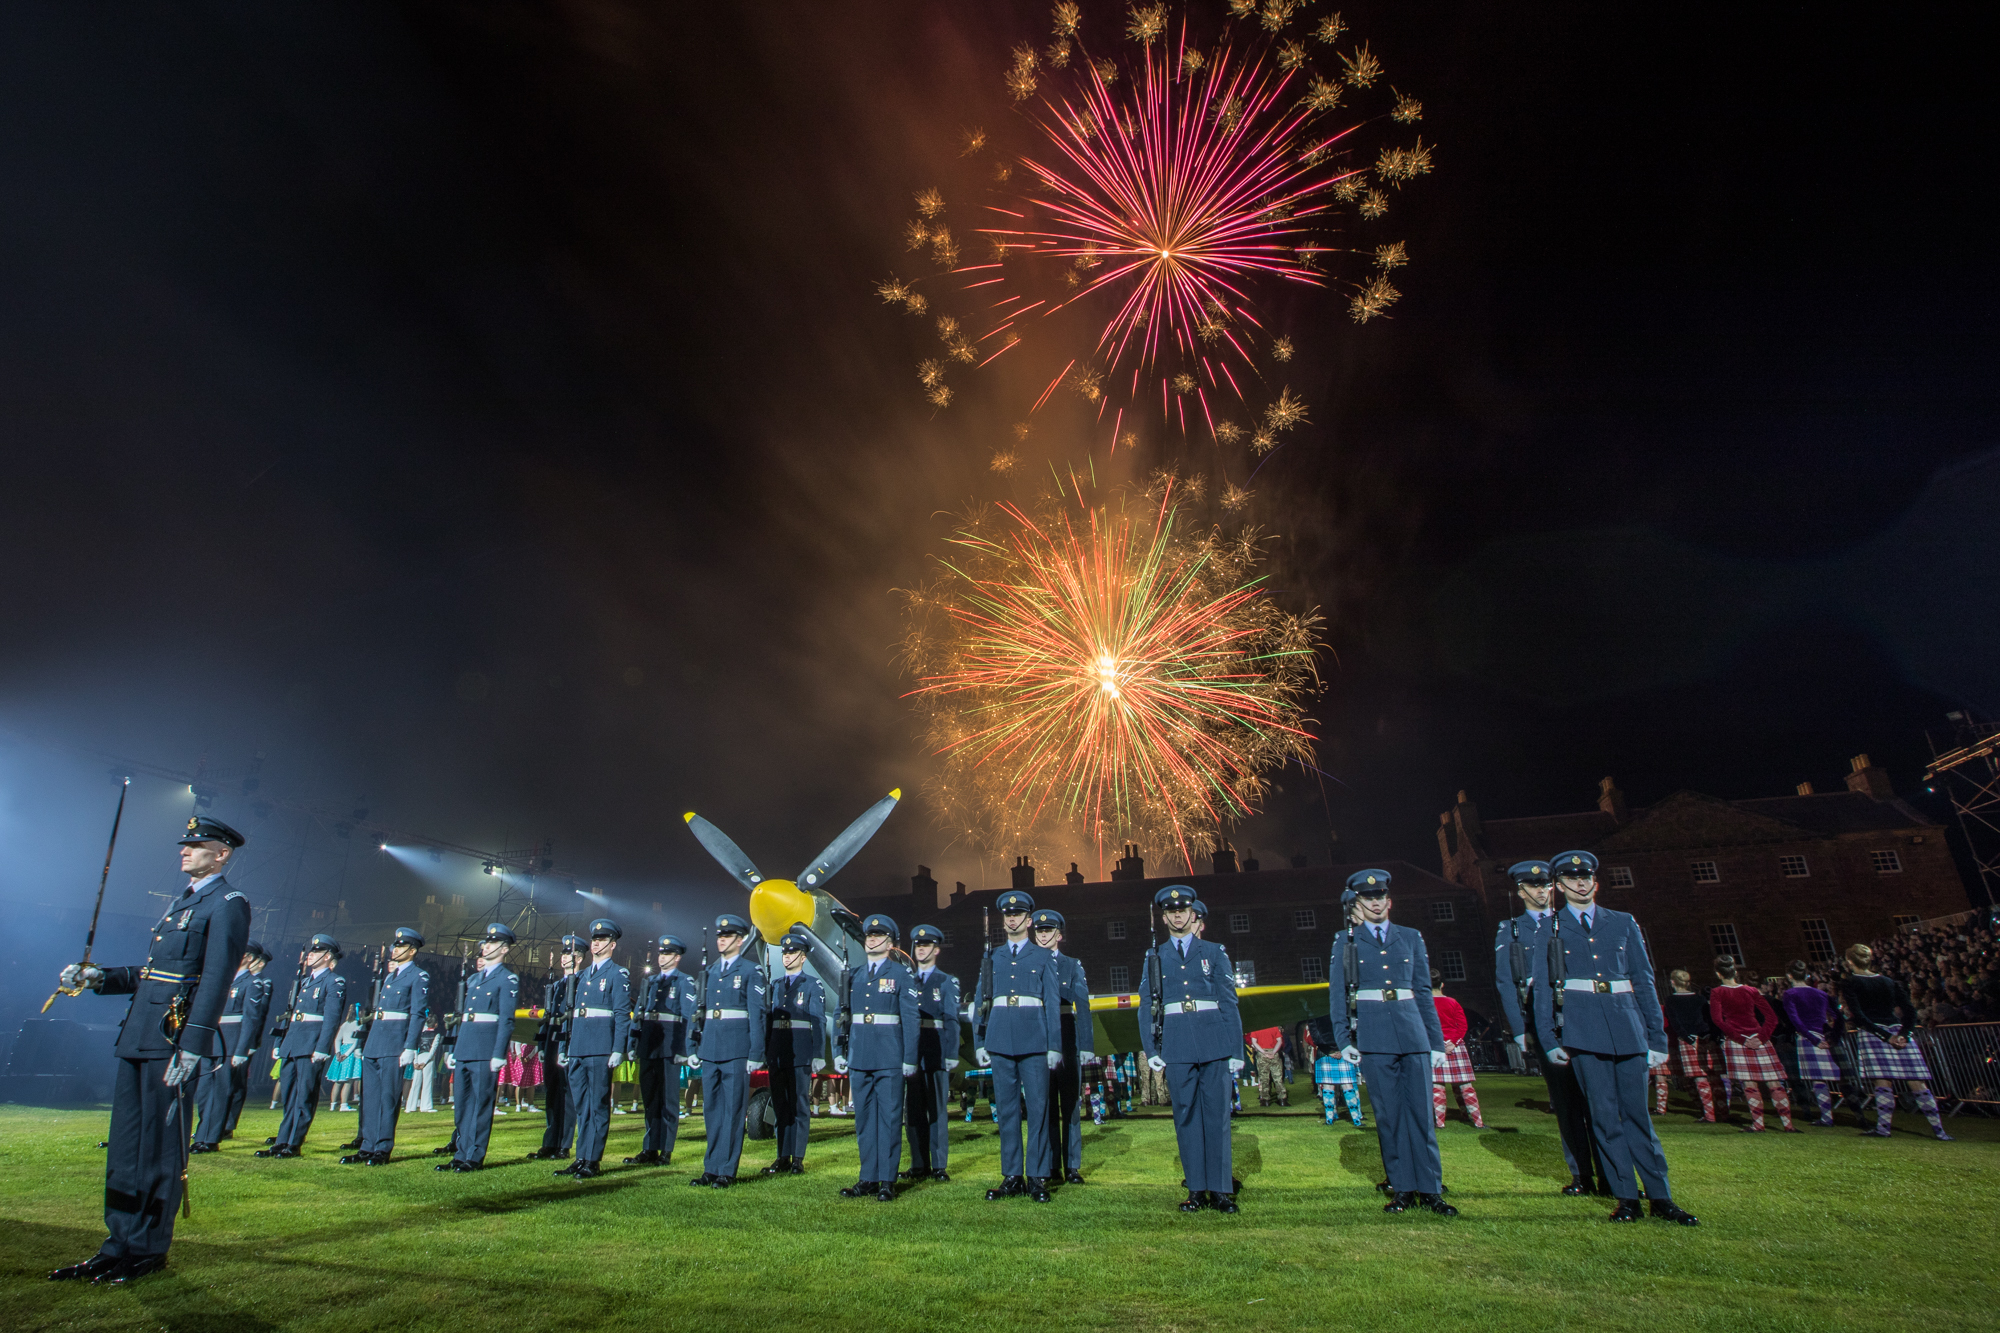 A spectacular fireworks display brought the Highland Military Tattoo at Fort George to a close.